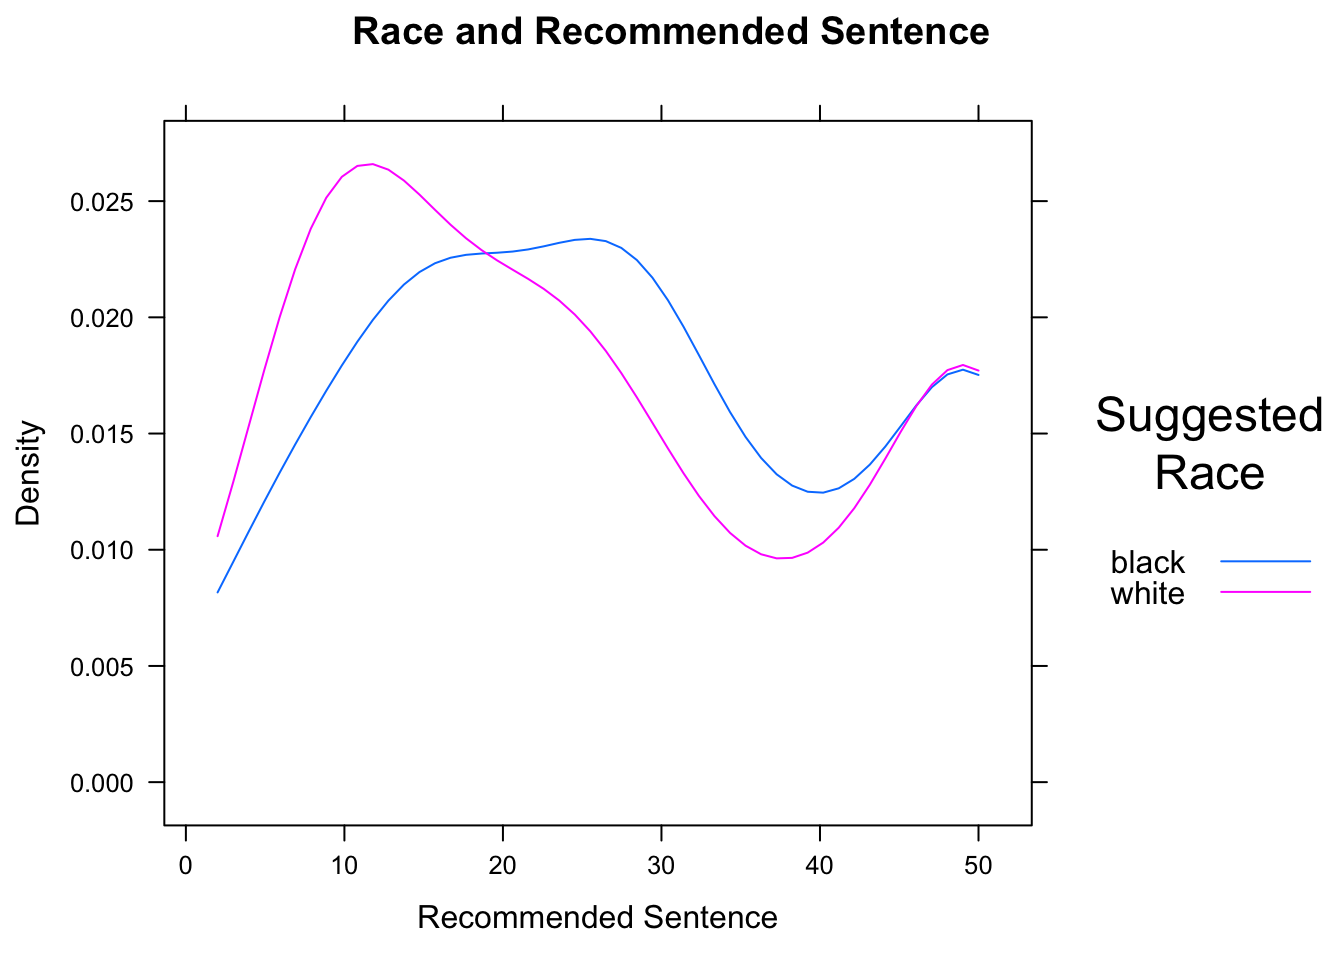 Race and Sentence.  We set limits for the density curves.